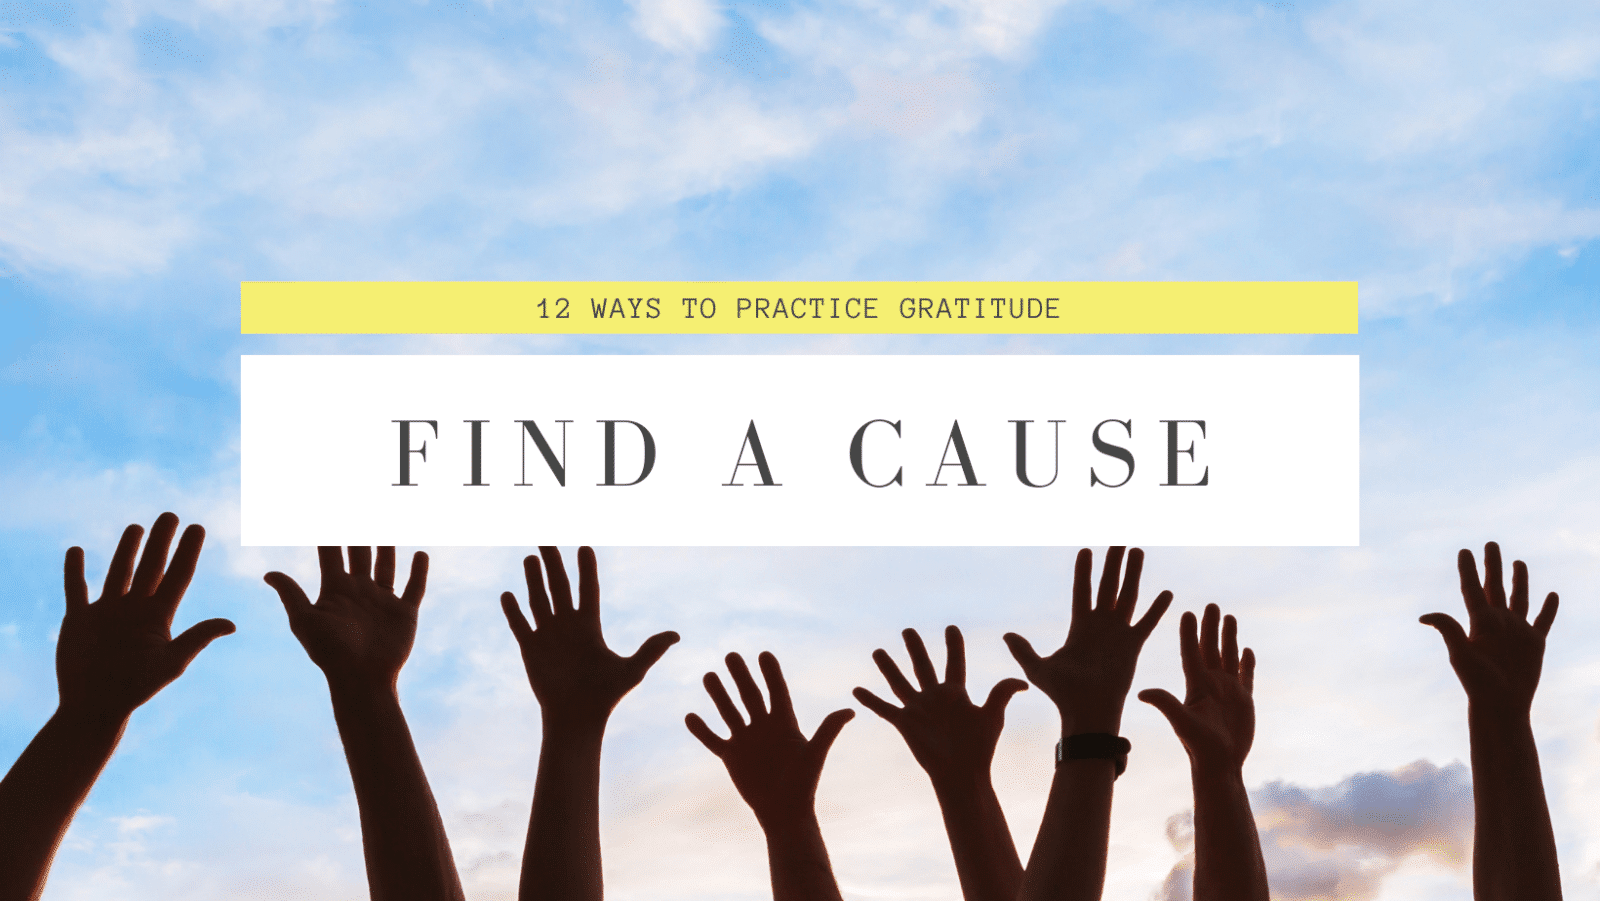 Women put up their hands to volunteer for a cause in how to practice gratitude.